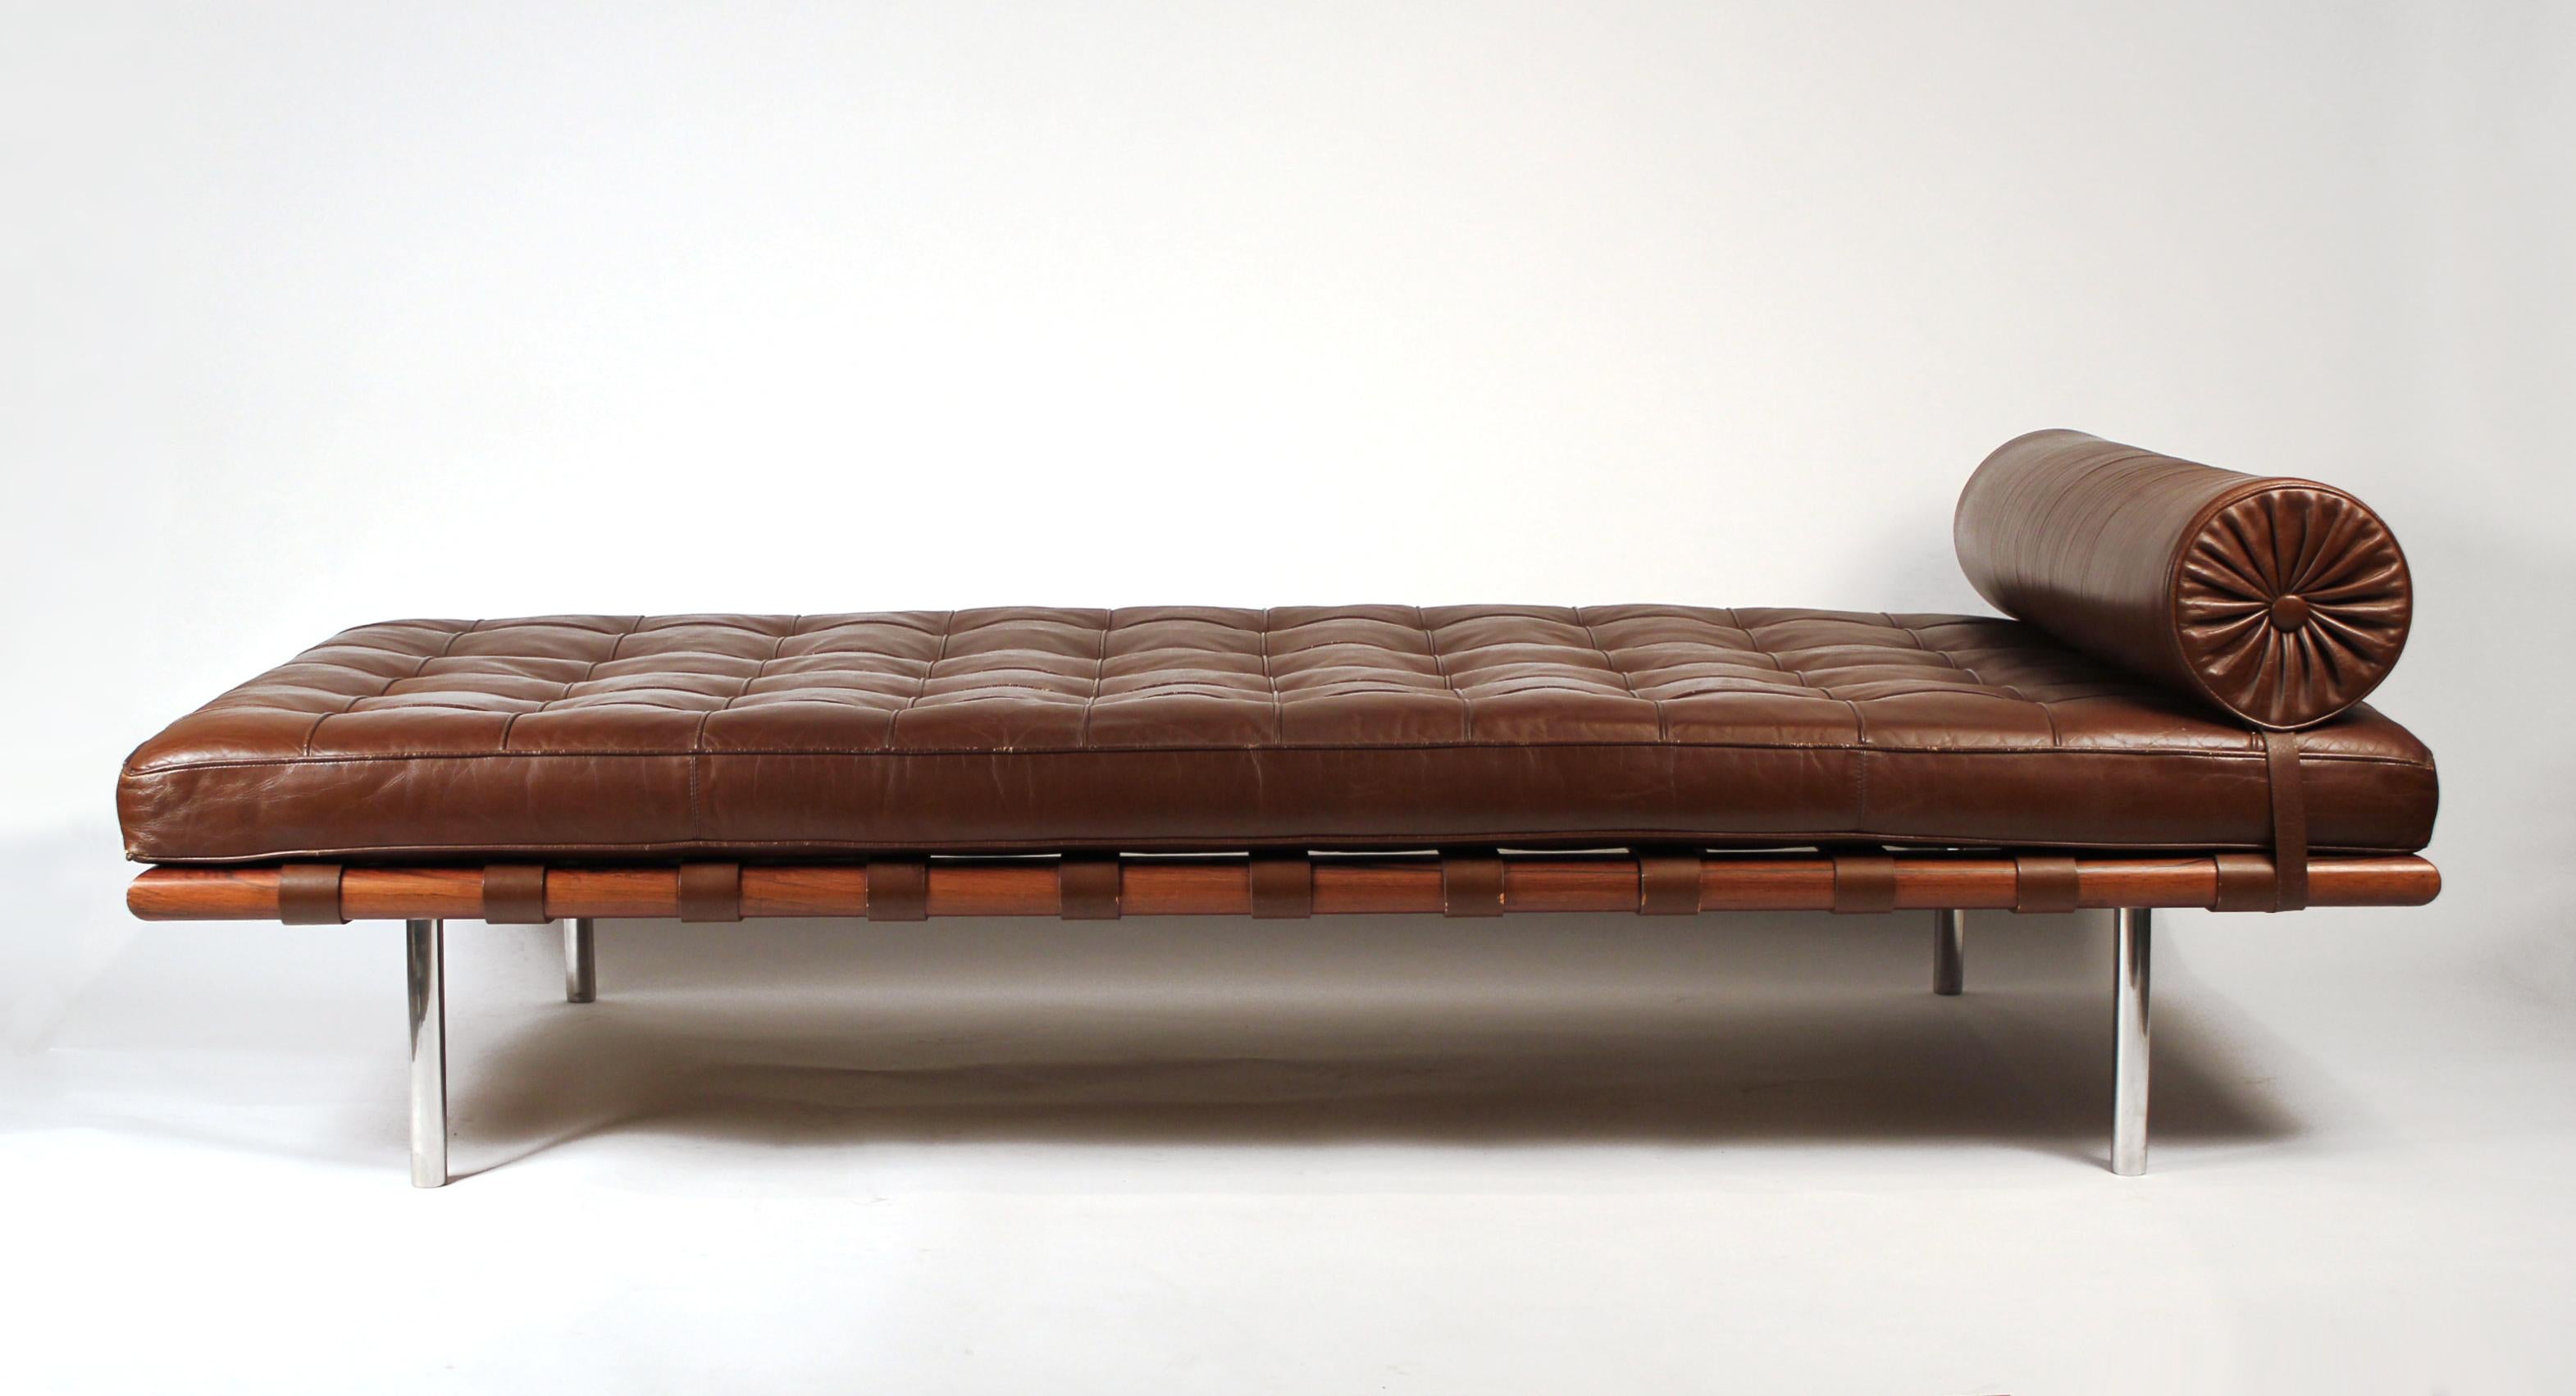 Steel Early Production, Rosewood Daybed designed by Ludwig Mies van der Rohe